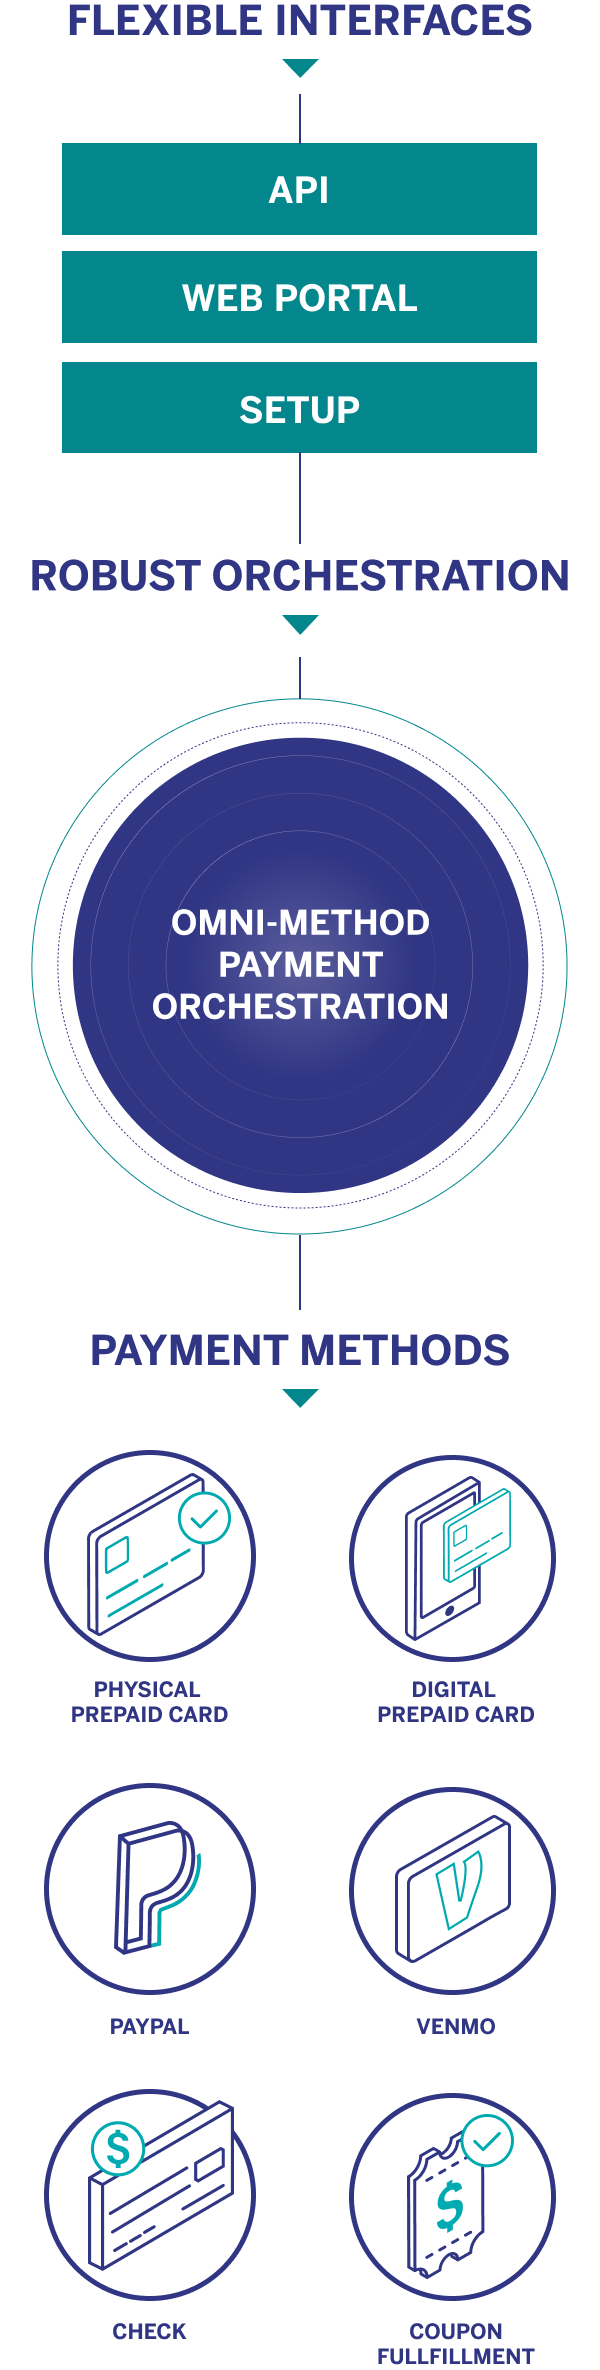 Flexible interfaces and robust orchestration, engaged with payment methods.